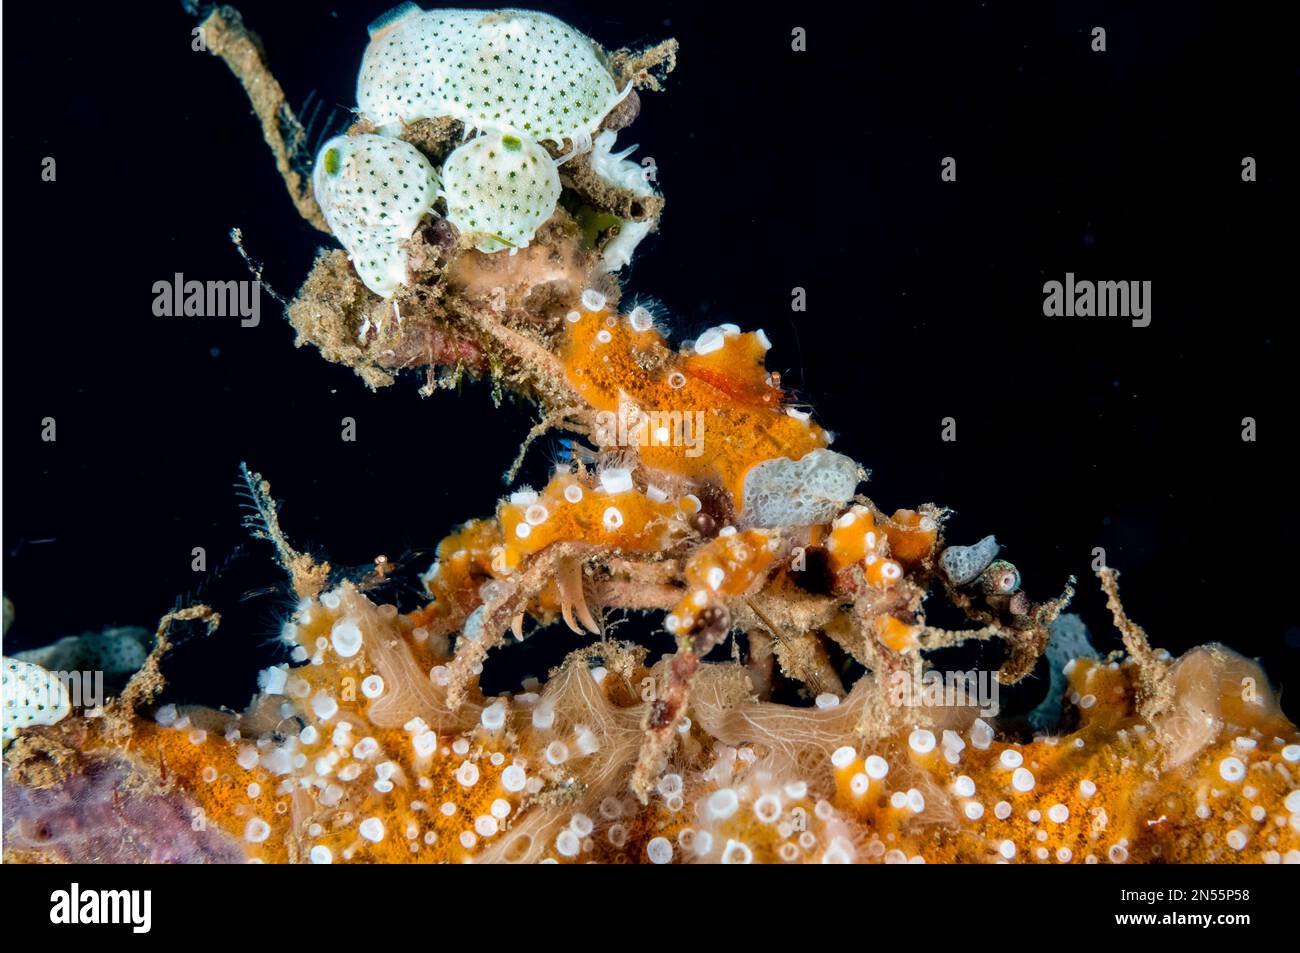 Decorator Crab, Majoidea Superfamily, covered with coral and Sea Squirts (Tunicata subphylum), Joleha dive site, Lembeh Straits, Sulawesi, Indonesia, Stock Photo